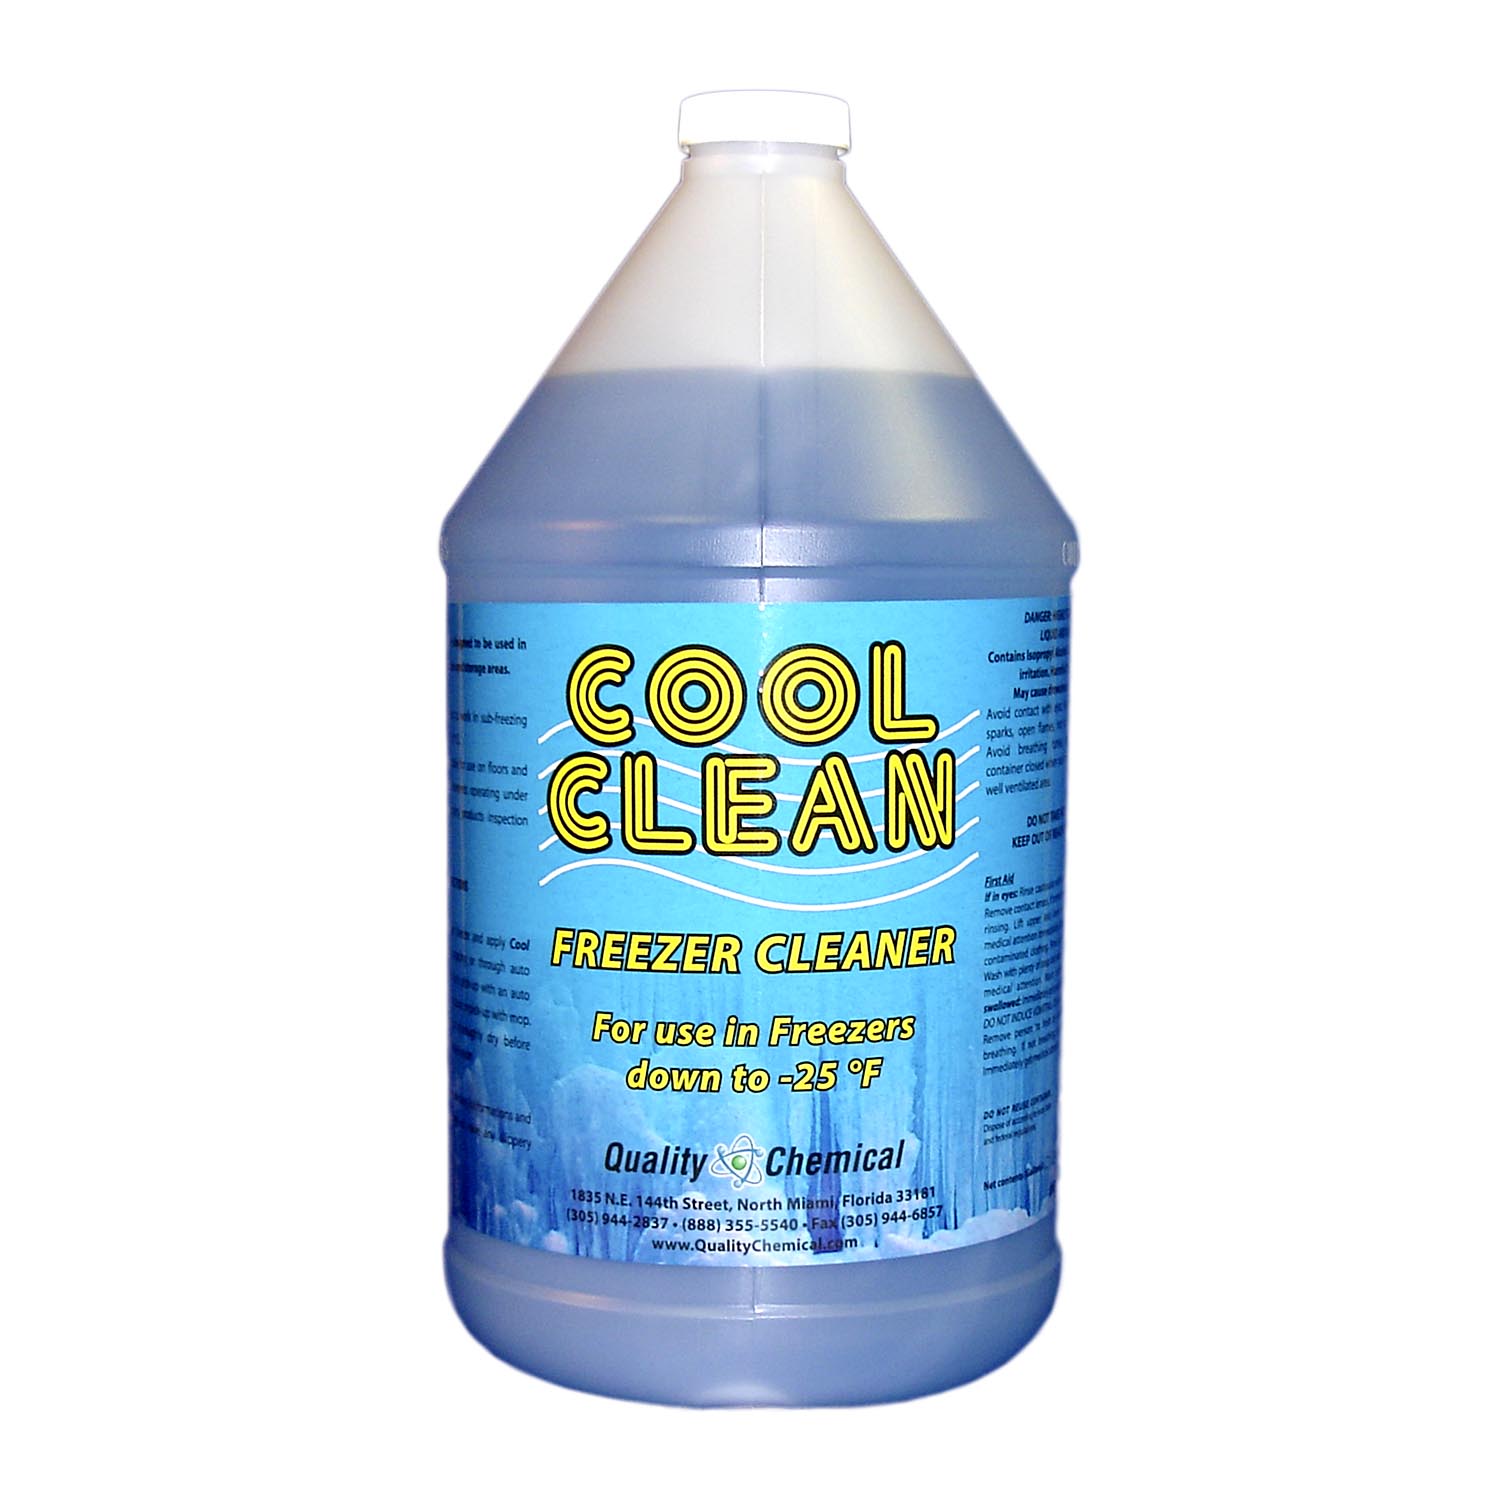 Cool Clean Freezer Cleaner